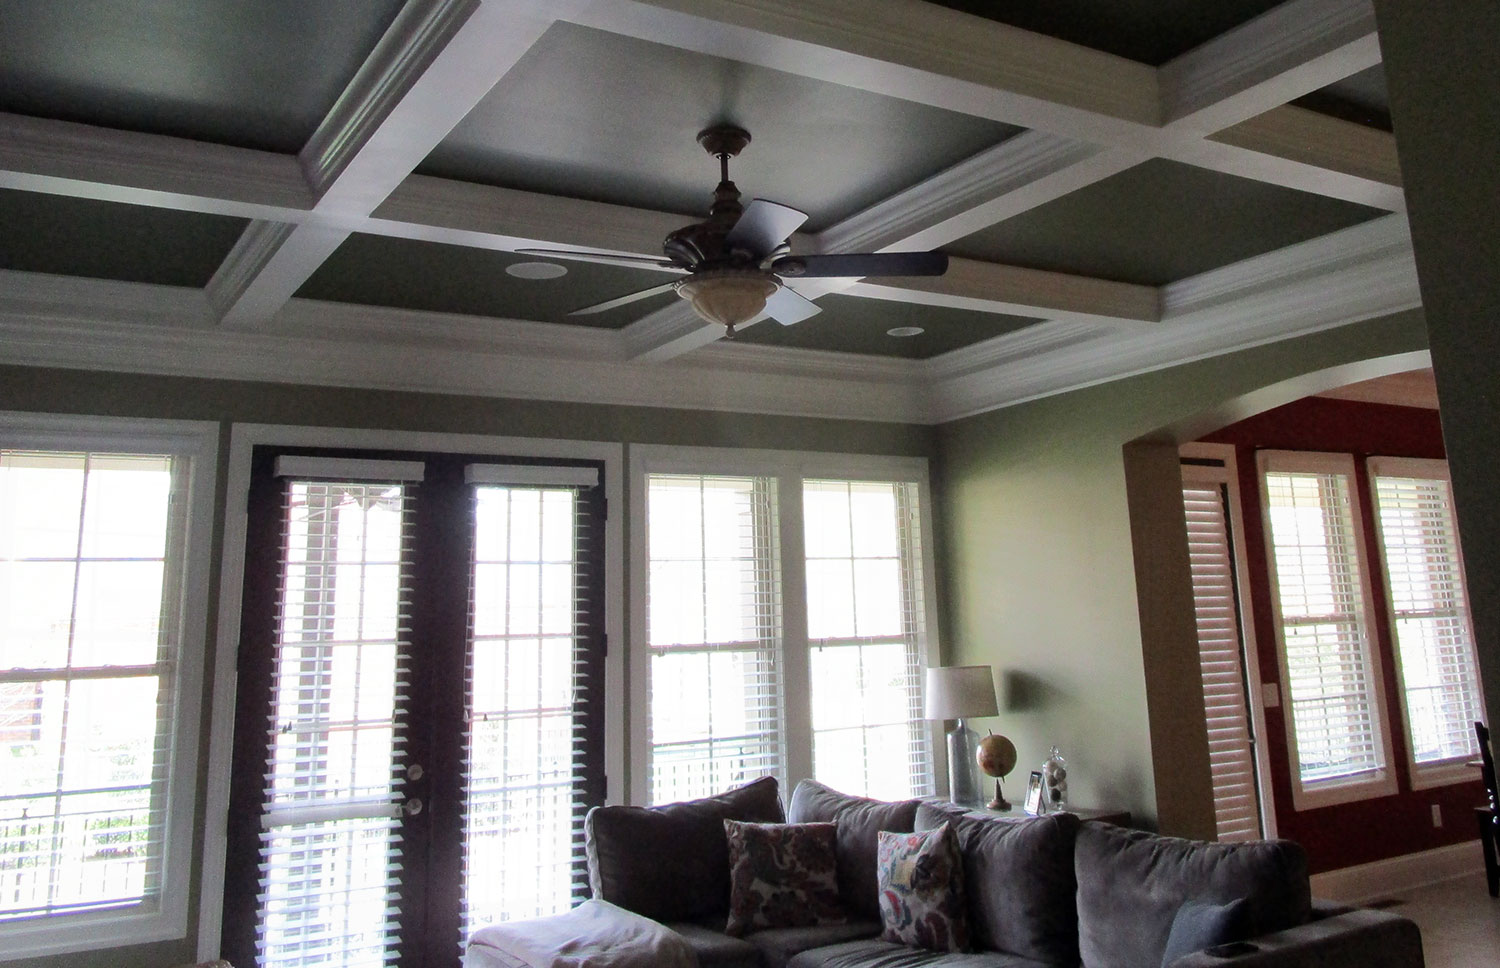 Family Room in Waxhaw, NC After